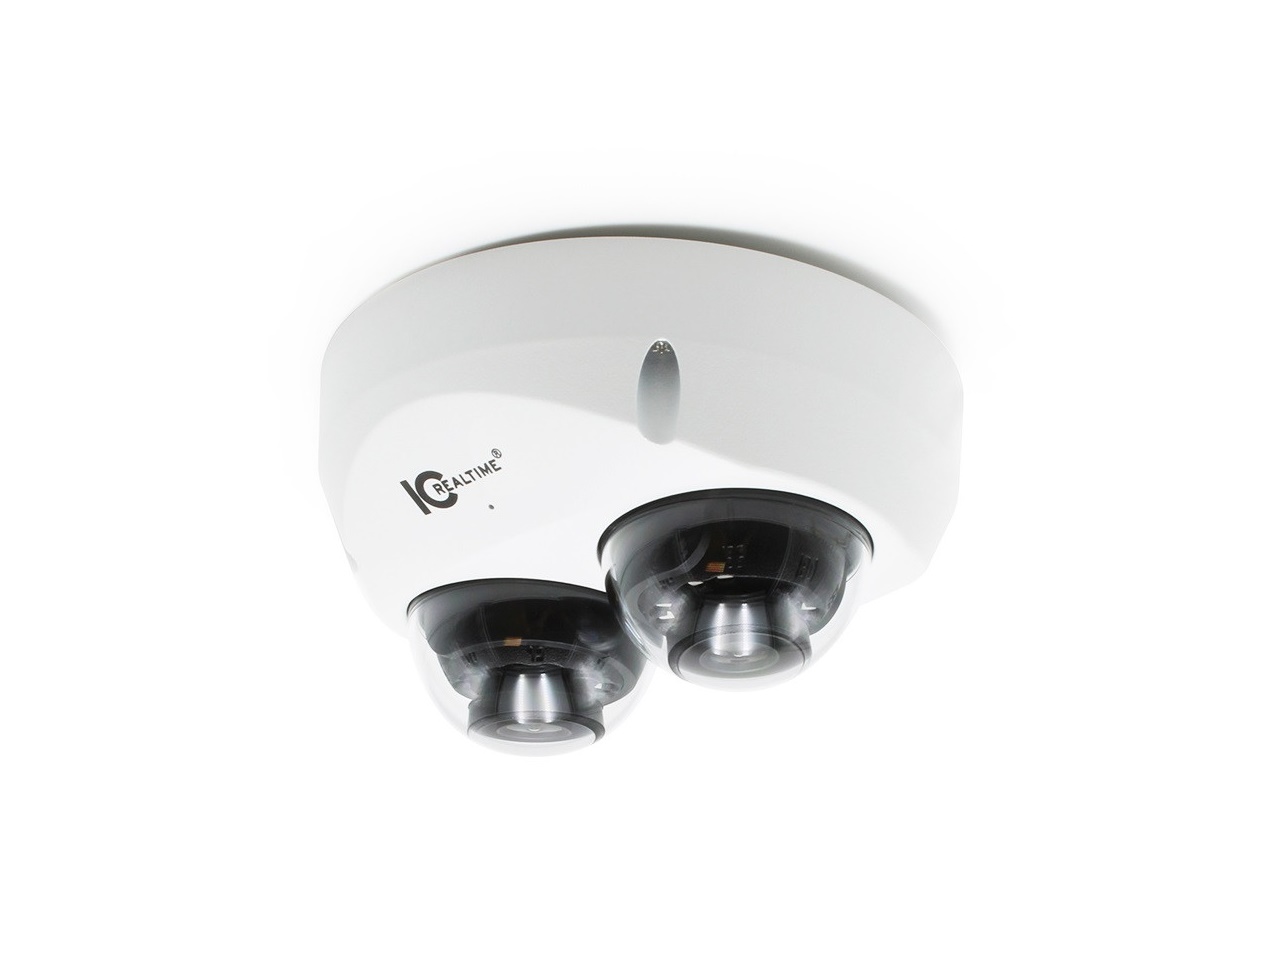 IPEL-DL80F-IRW1 2 X 4MP Dual Lens IP Wedge Dome Camera/Starlight Equipped/2x 2.8mm Fixed Lenses/98ft IR by ICRealtime